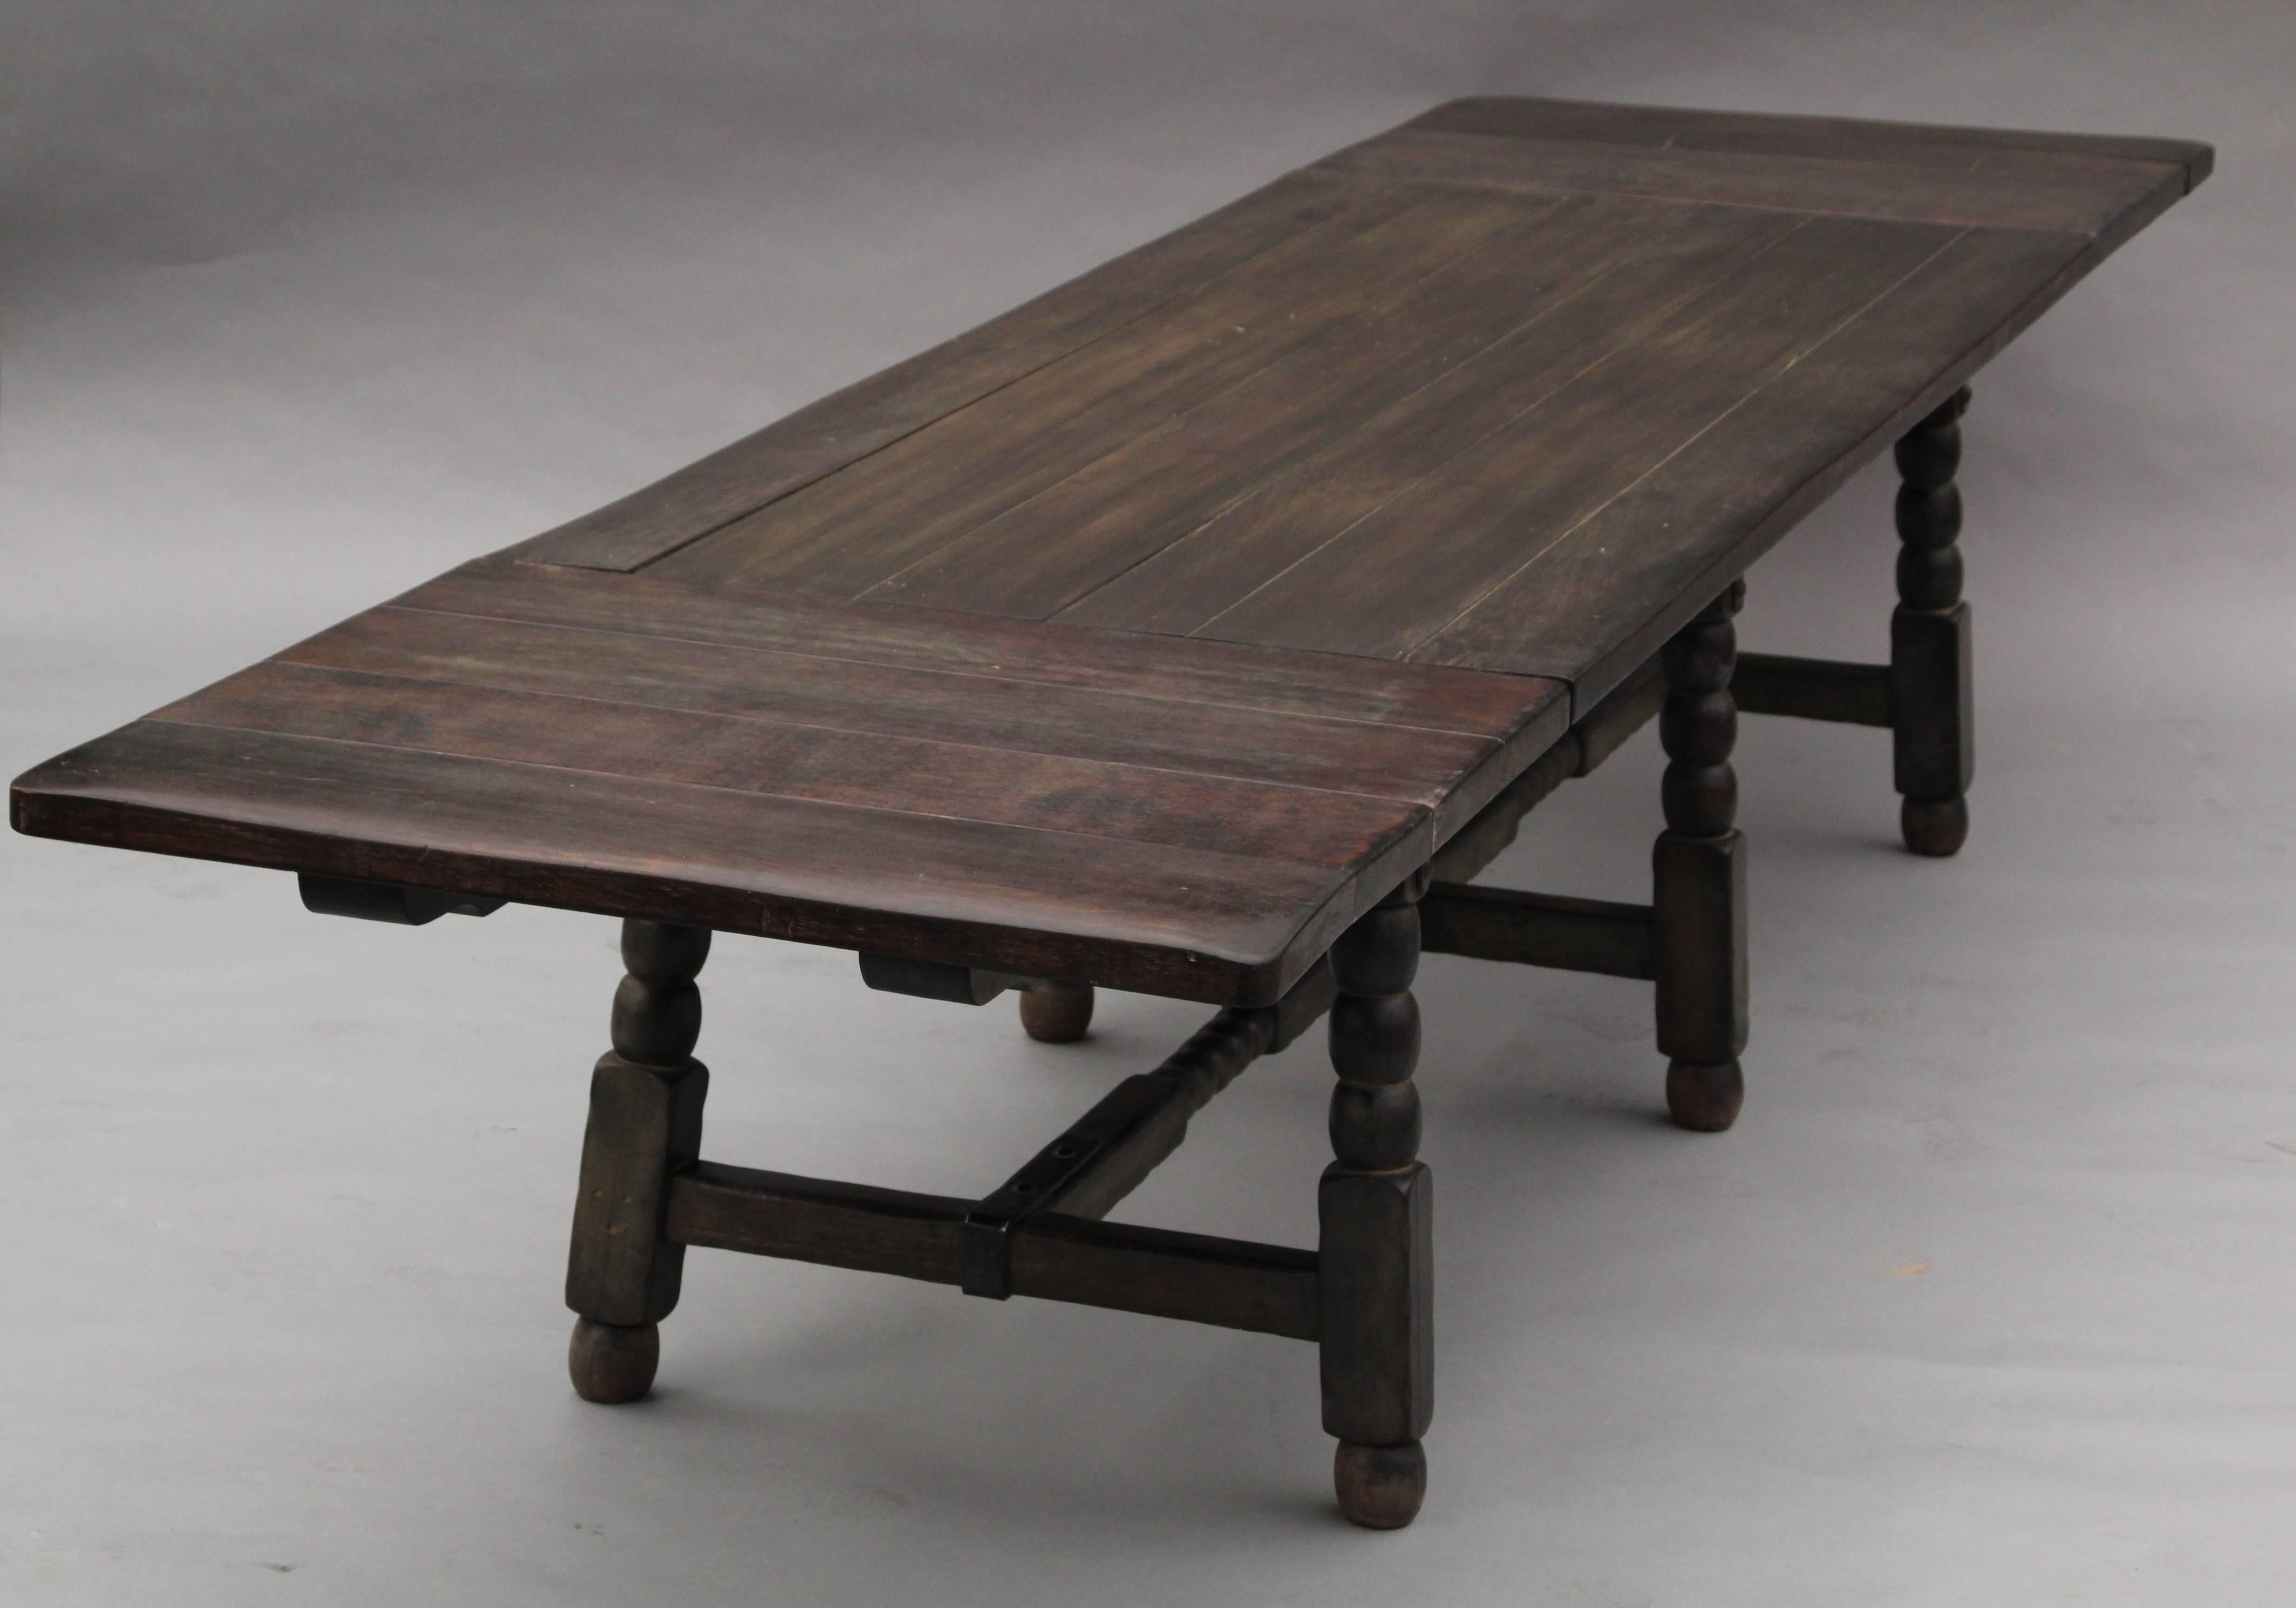 Very long Monterey table named the Bela Lugosi table as this model was initially designed for the actor in the 1930s by the Monterey Company. Few of these tables have been made. The table has six leafs and is branded Monterey.
The table has 4 leafs